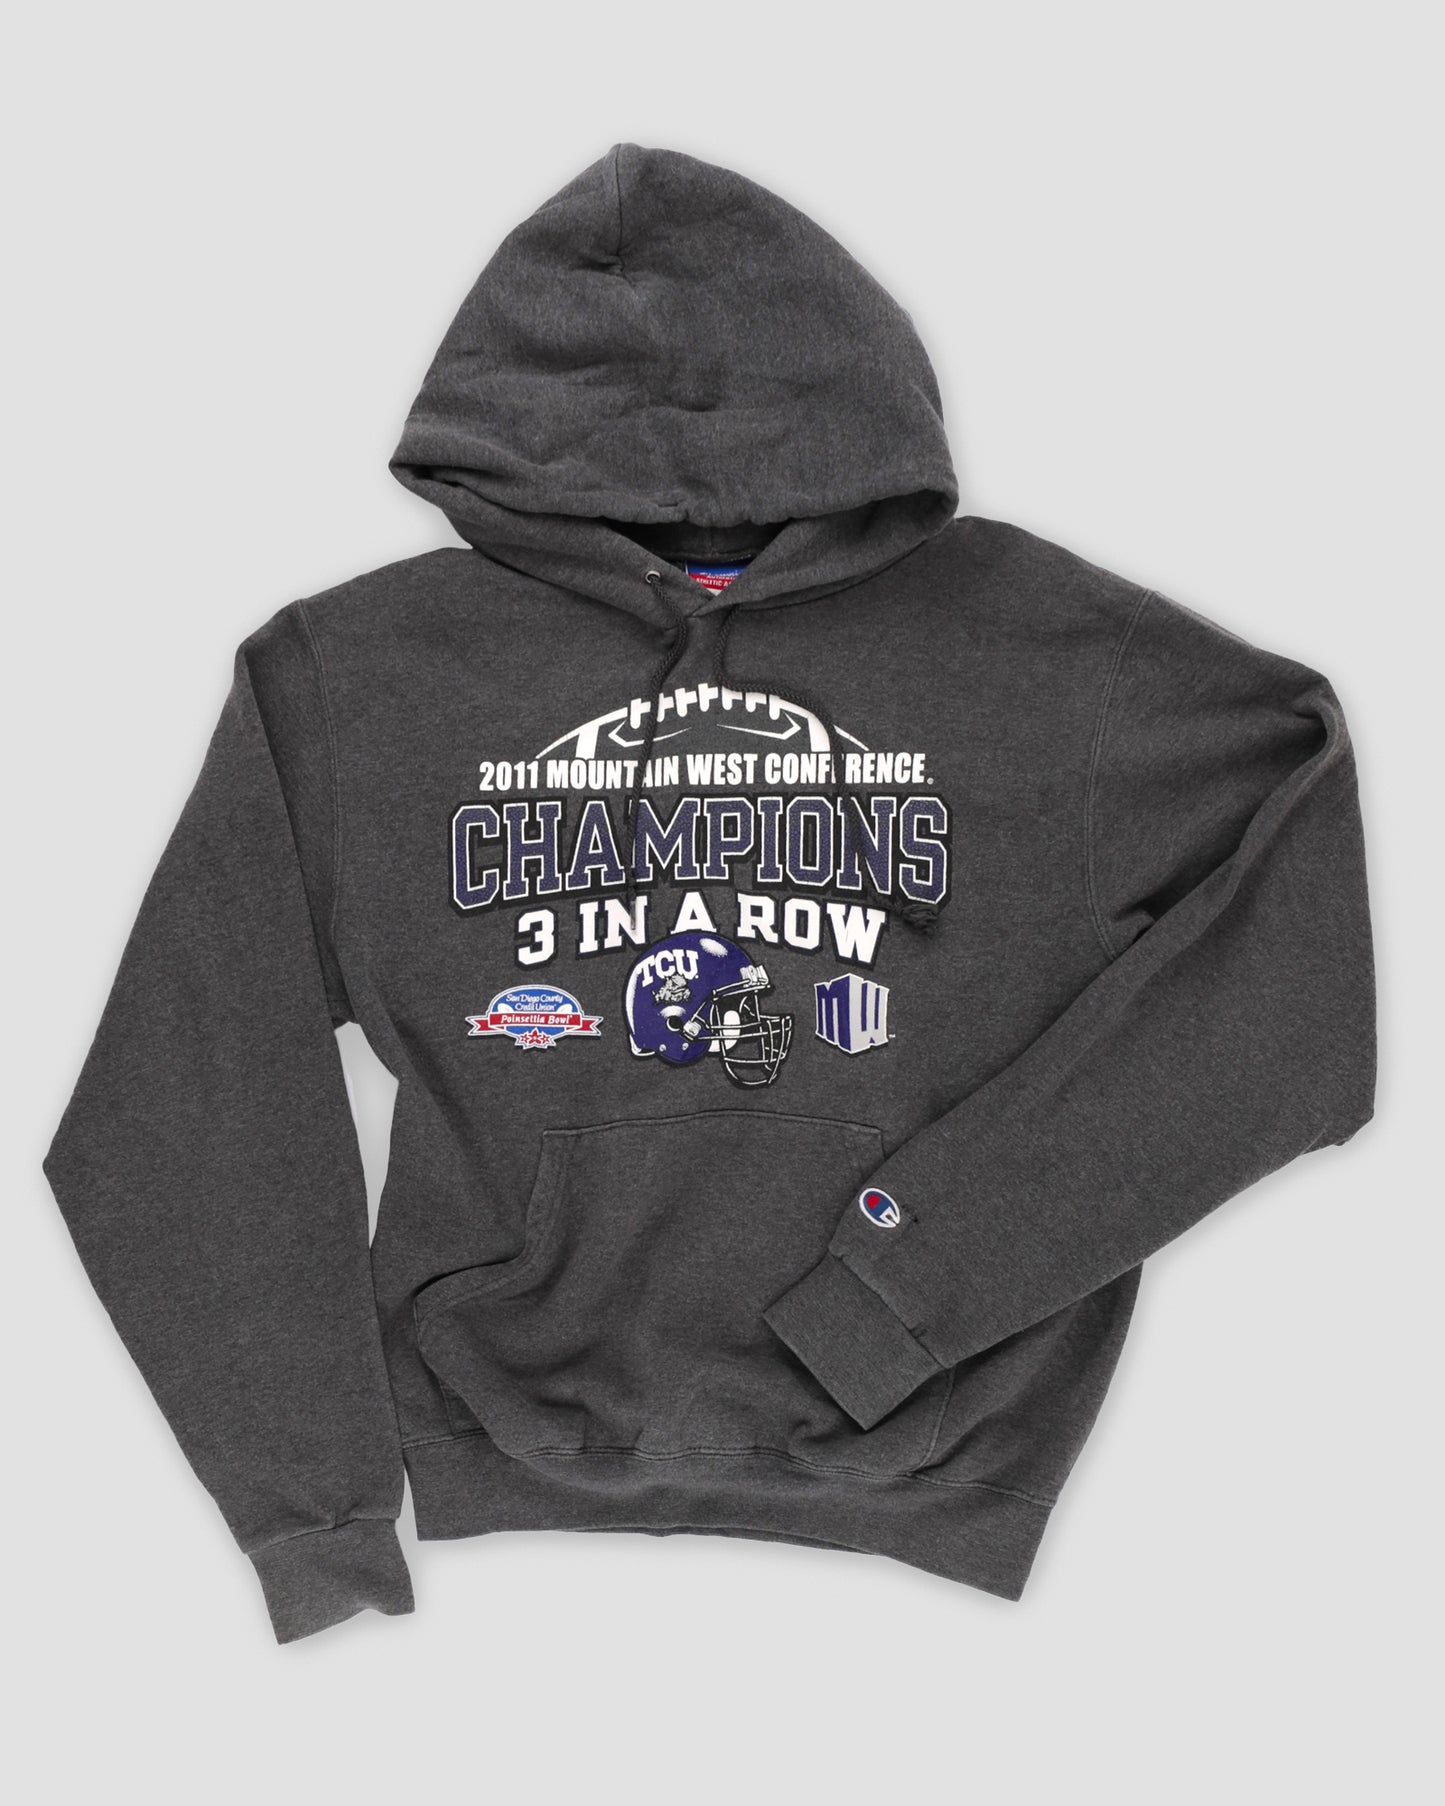 HOODIE  - Vintage Champion 2011 Mountain West Conference S